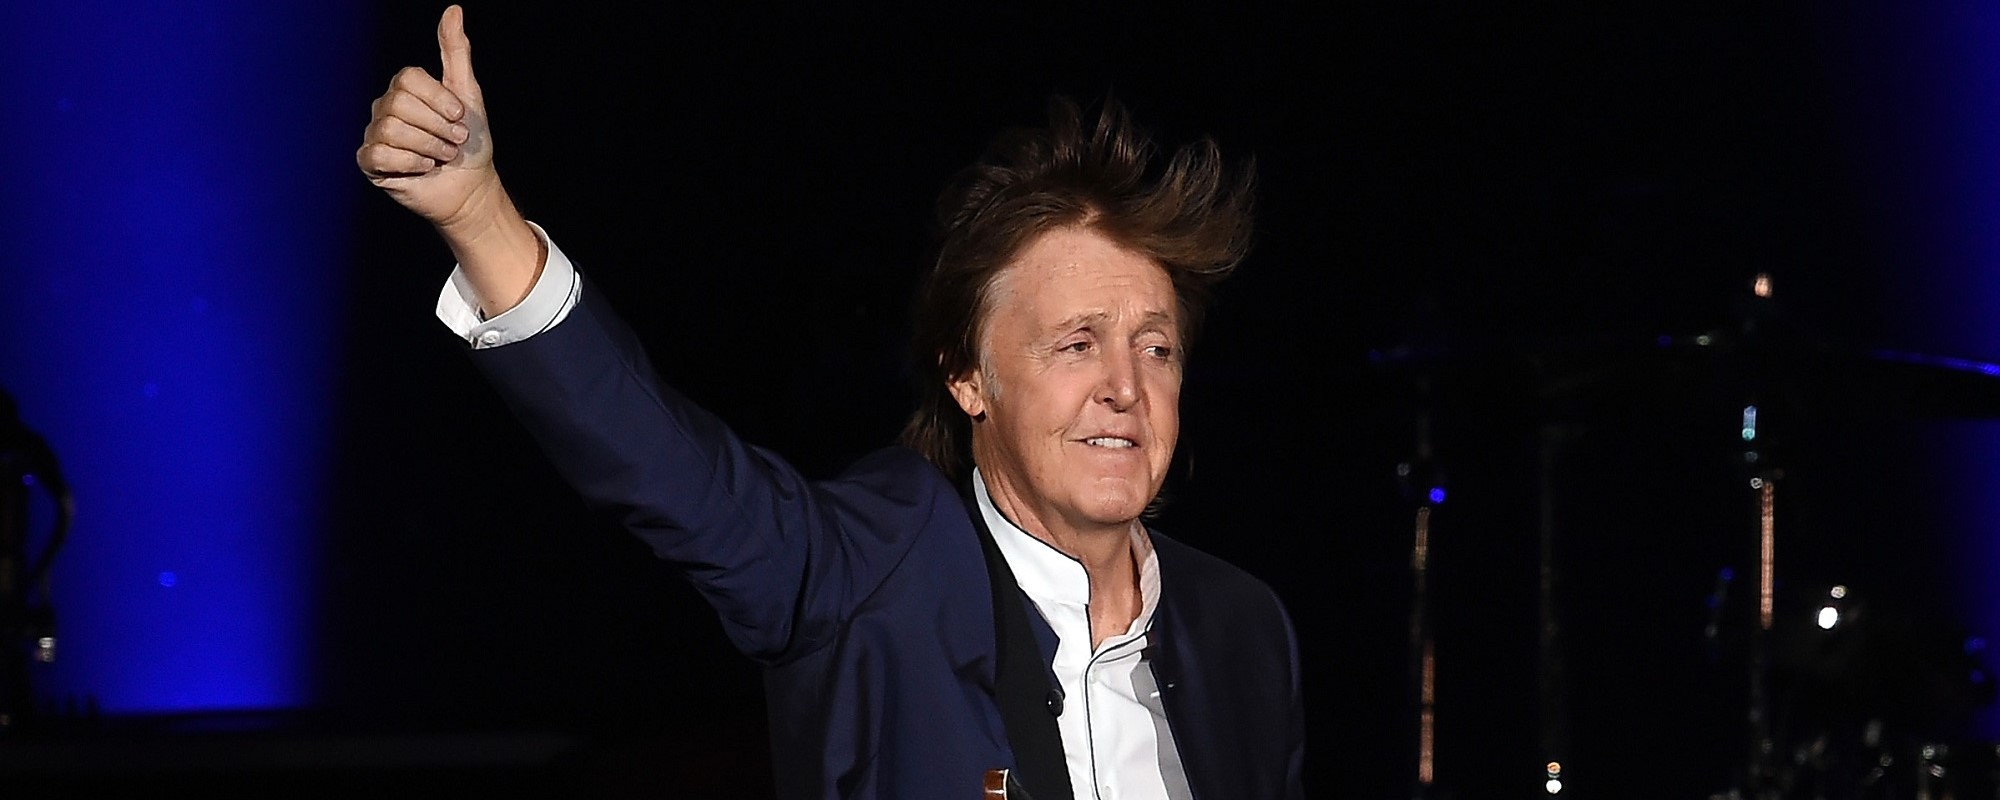 Baby, He’s a Rich Man: Paul McCartney Is Again Ranked the Wealthiest U.K. Music Artist, with Billion-Pound Fortune